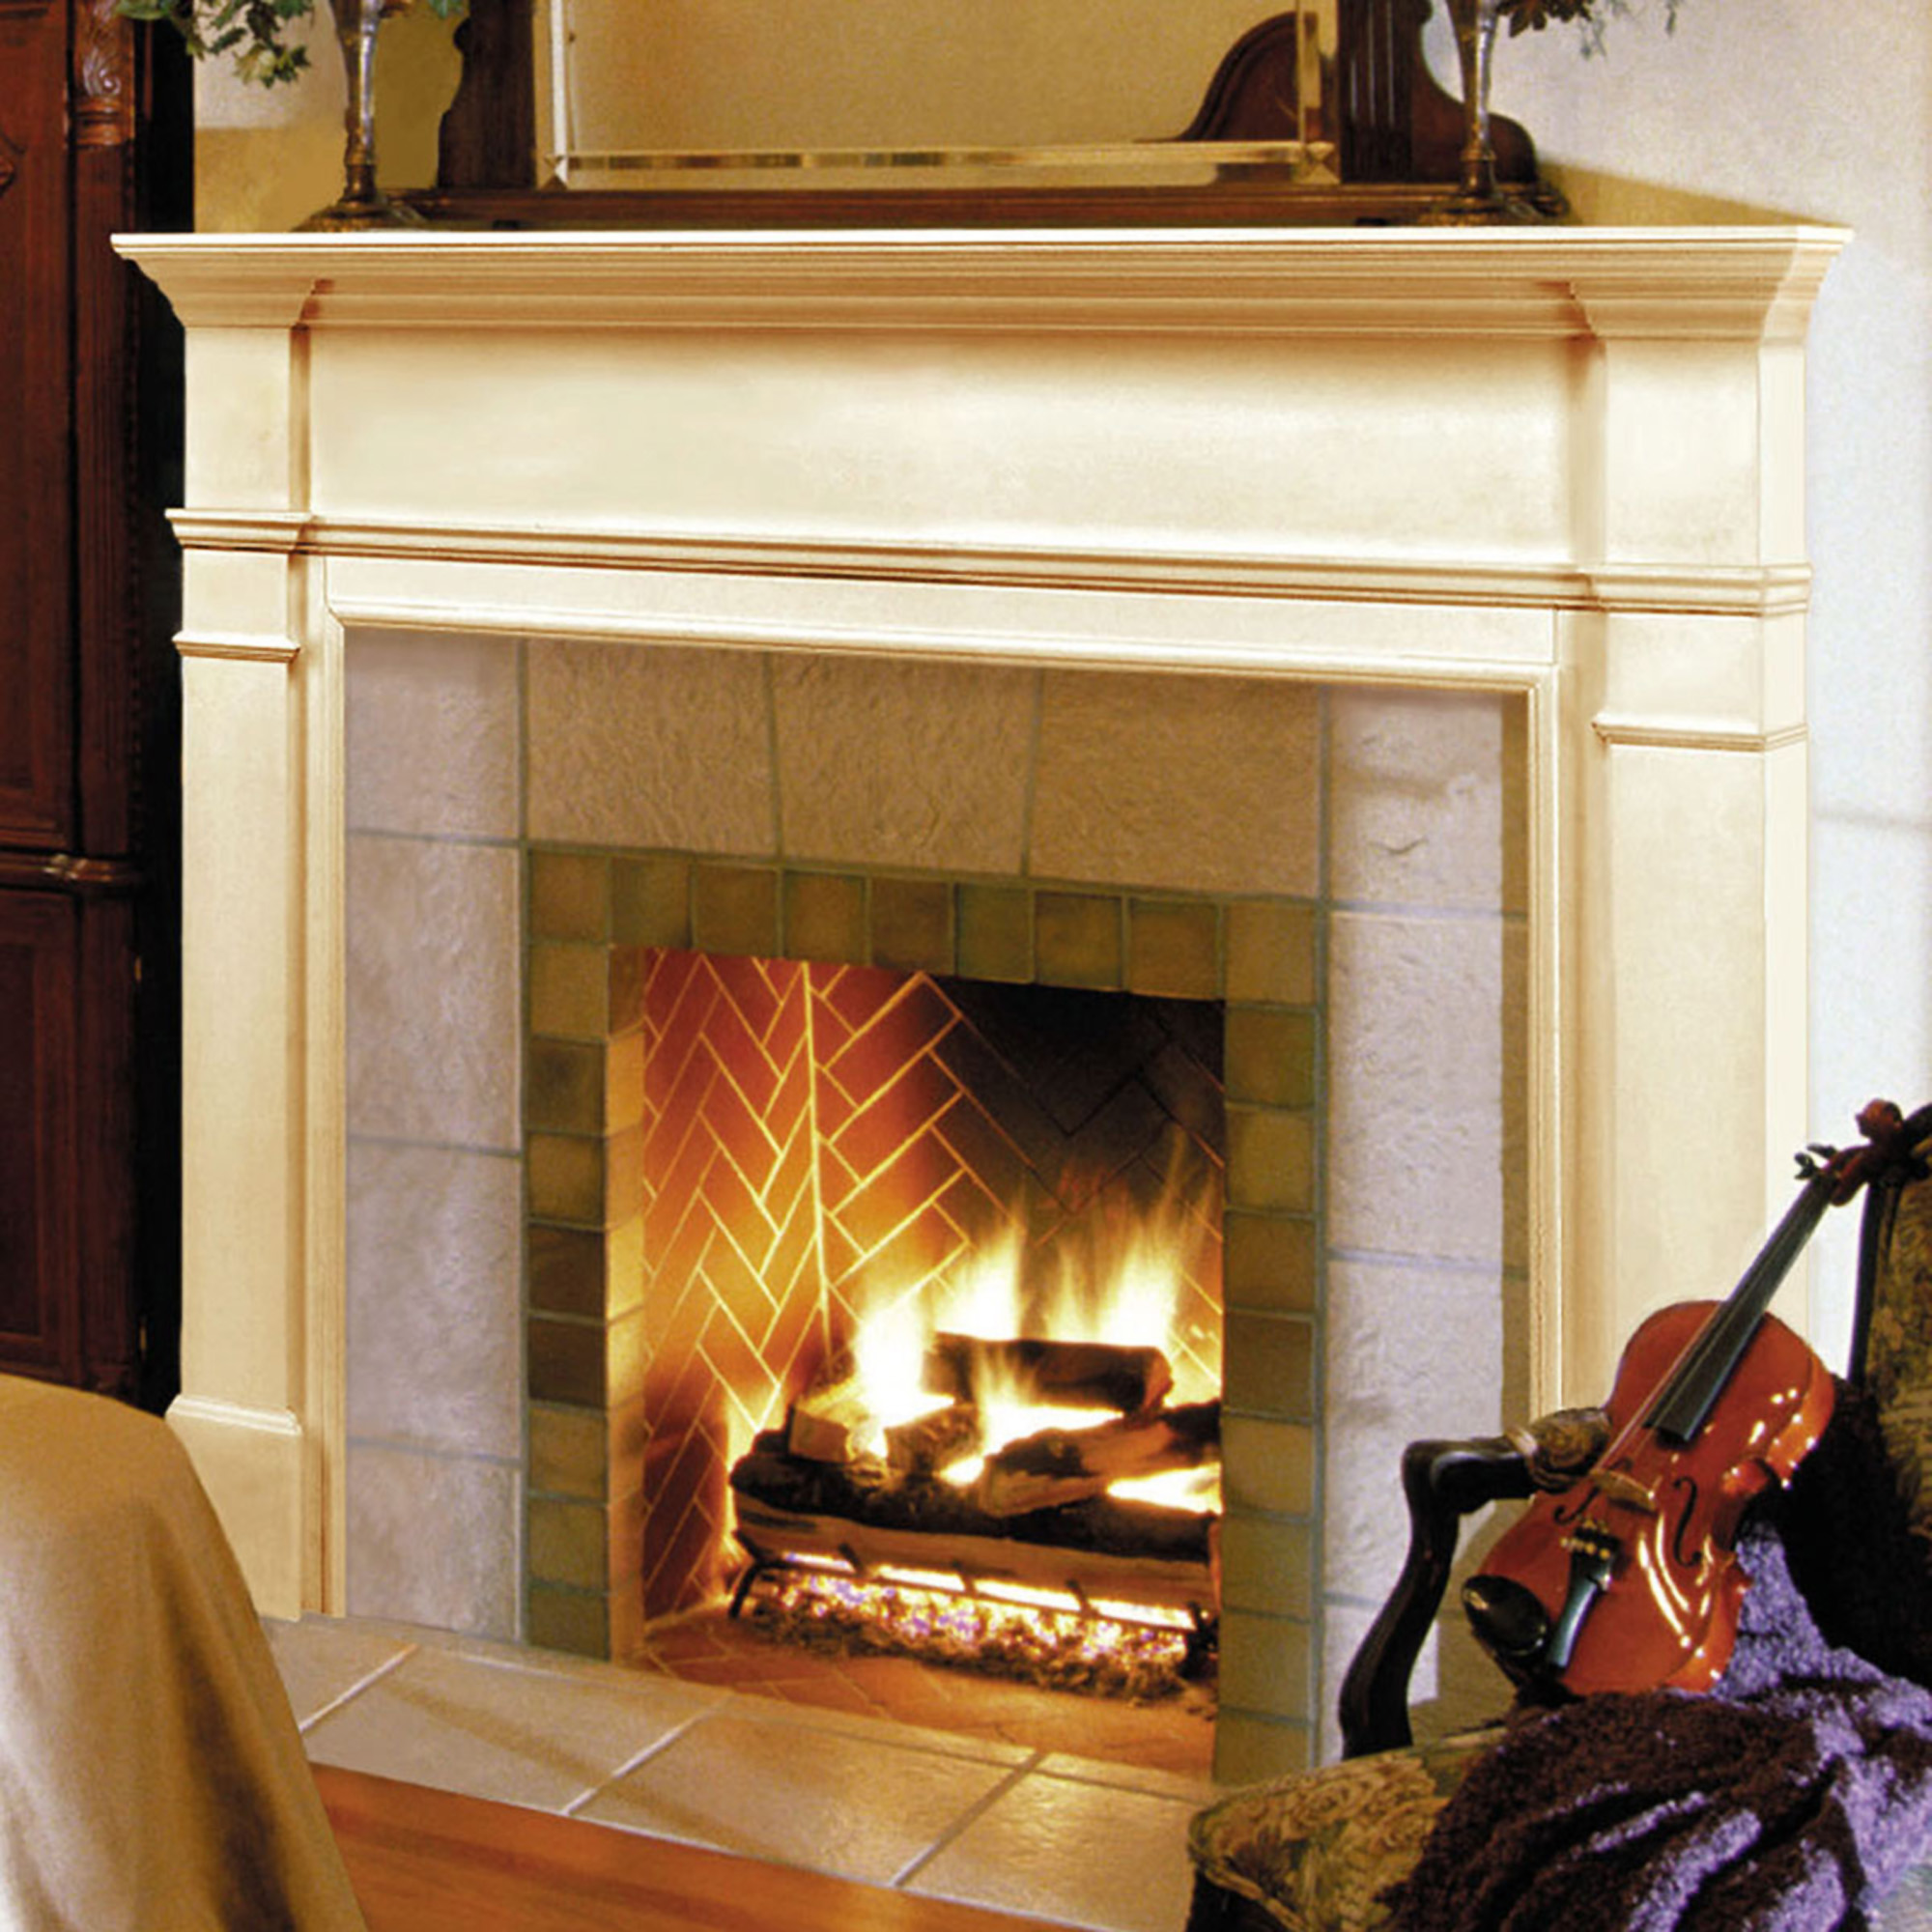 The 120 Windsor Wood Mantel by Pearl